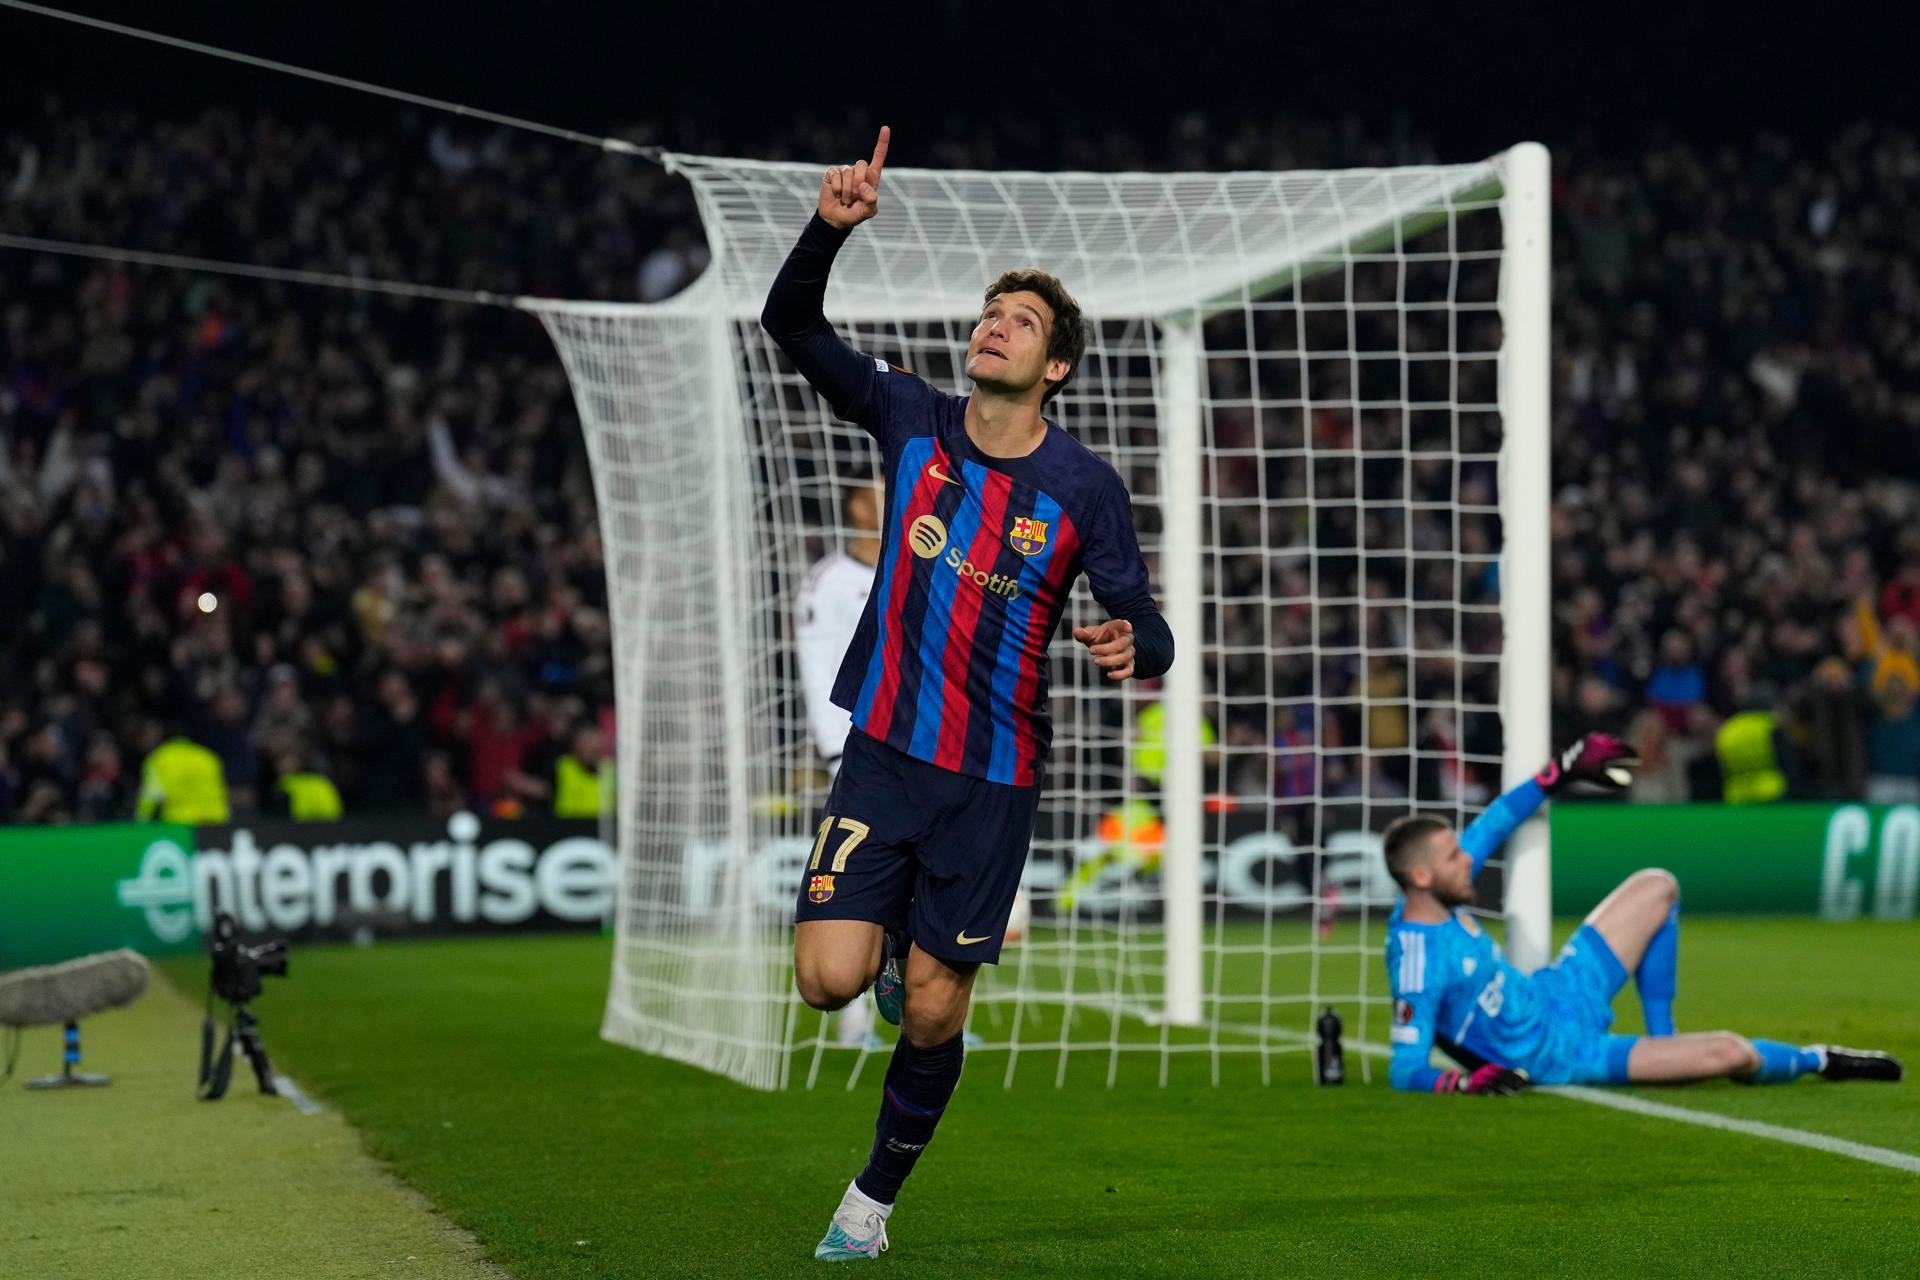 Man Utd eyeing Barca's Alonso to fill void left by Shaw